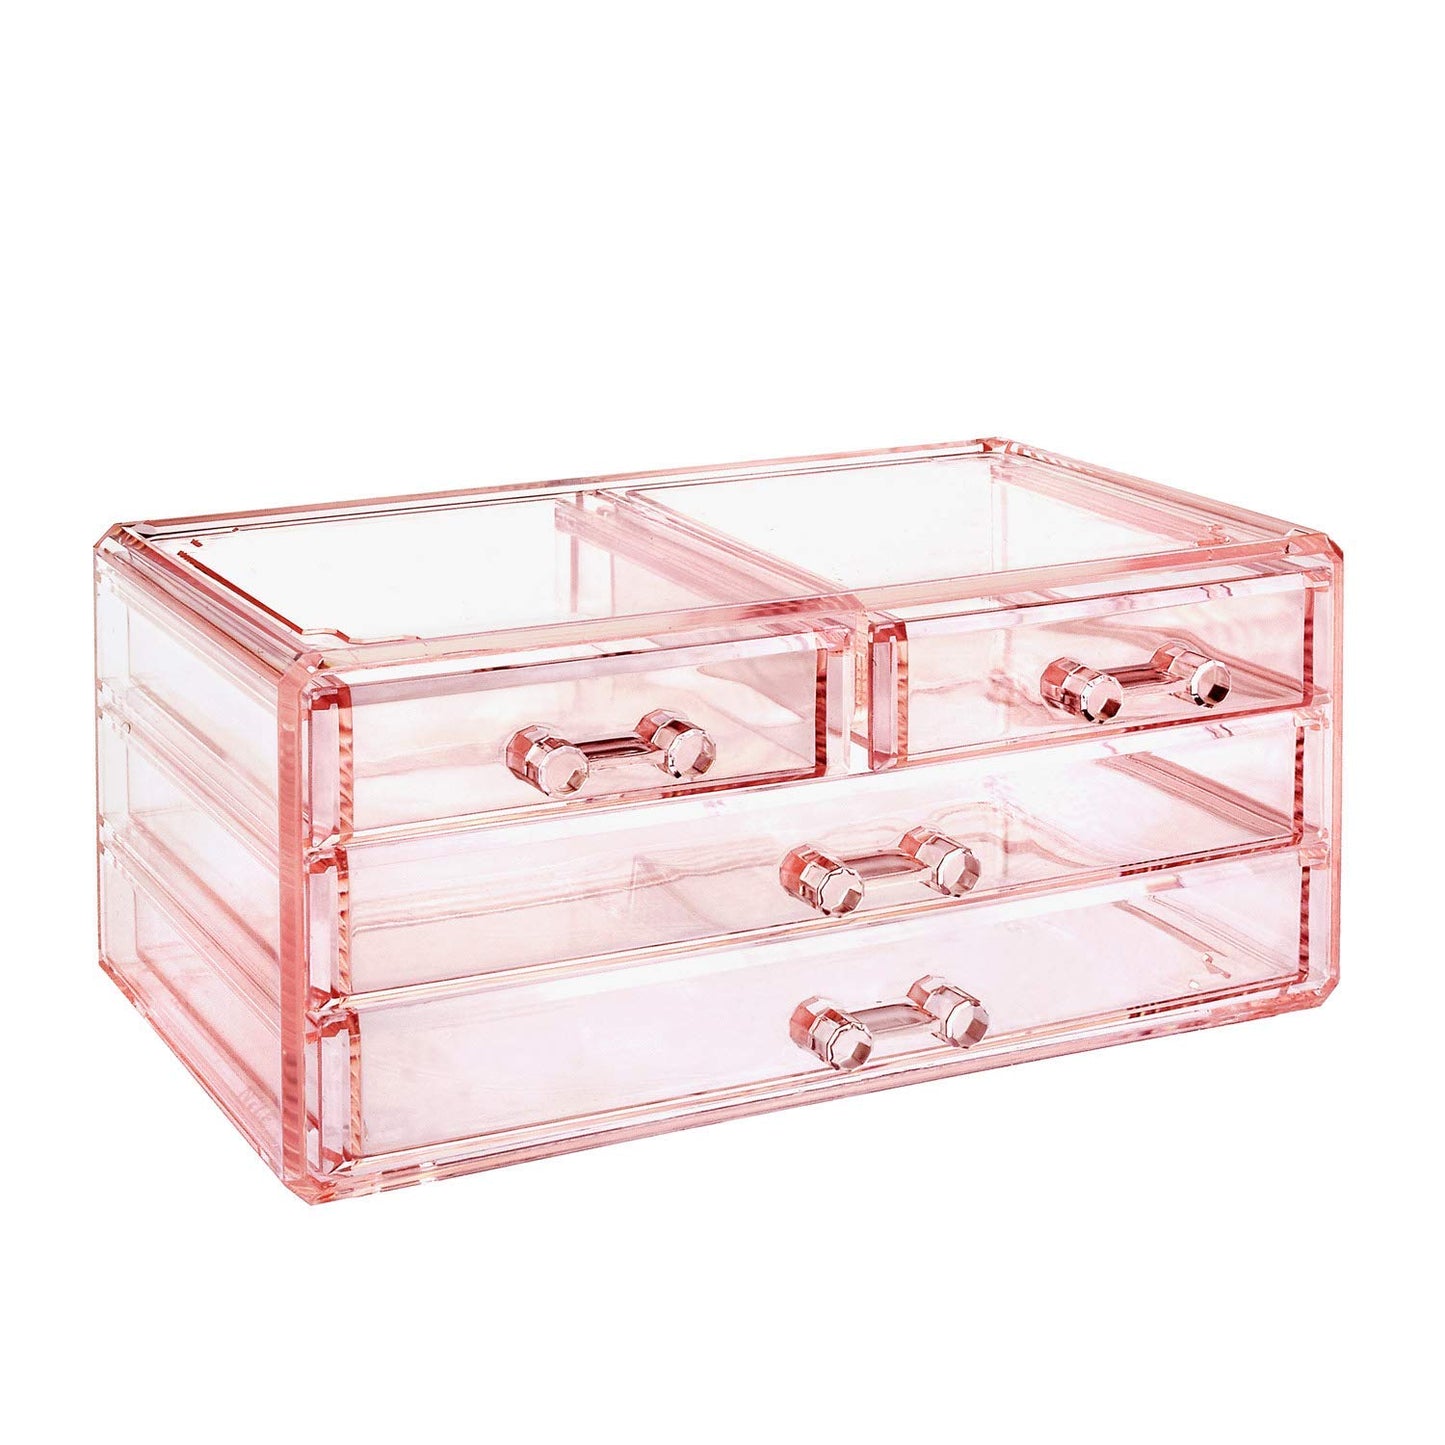 Ikee Design Pink Jewelry & Cosmetic Storage Display Boxes Two Pieces Set, Organizer Makeup Holder, for Vanity